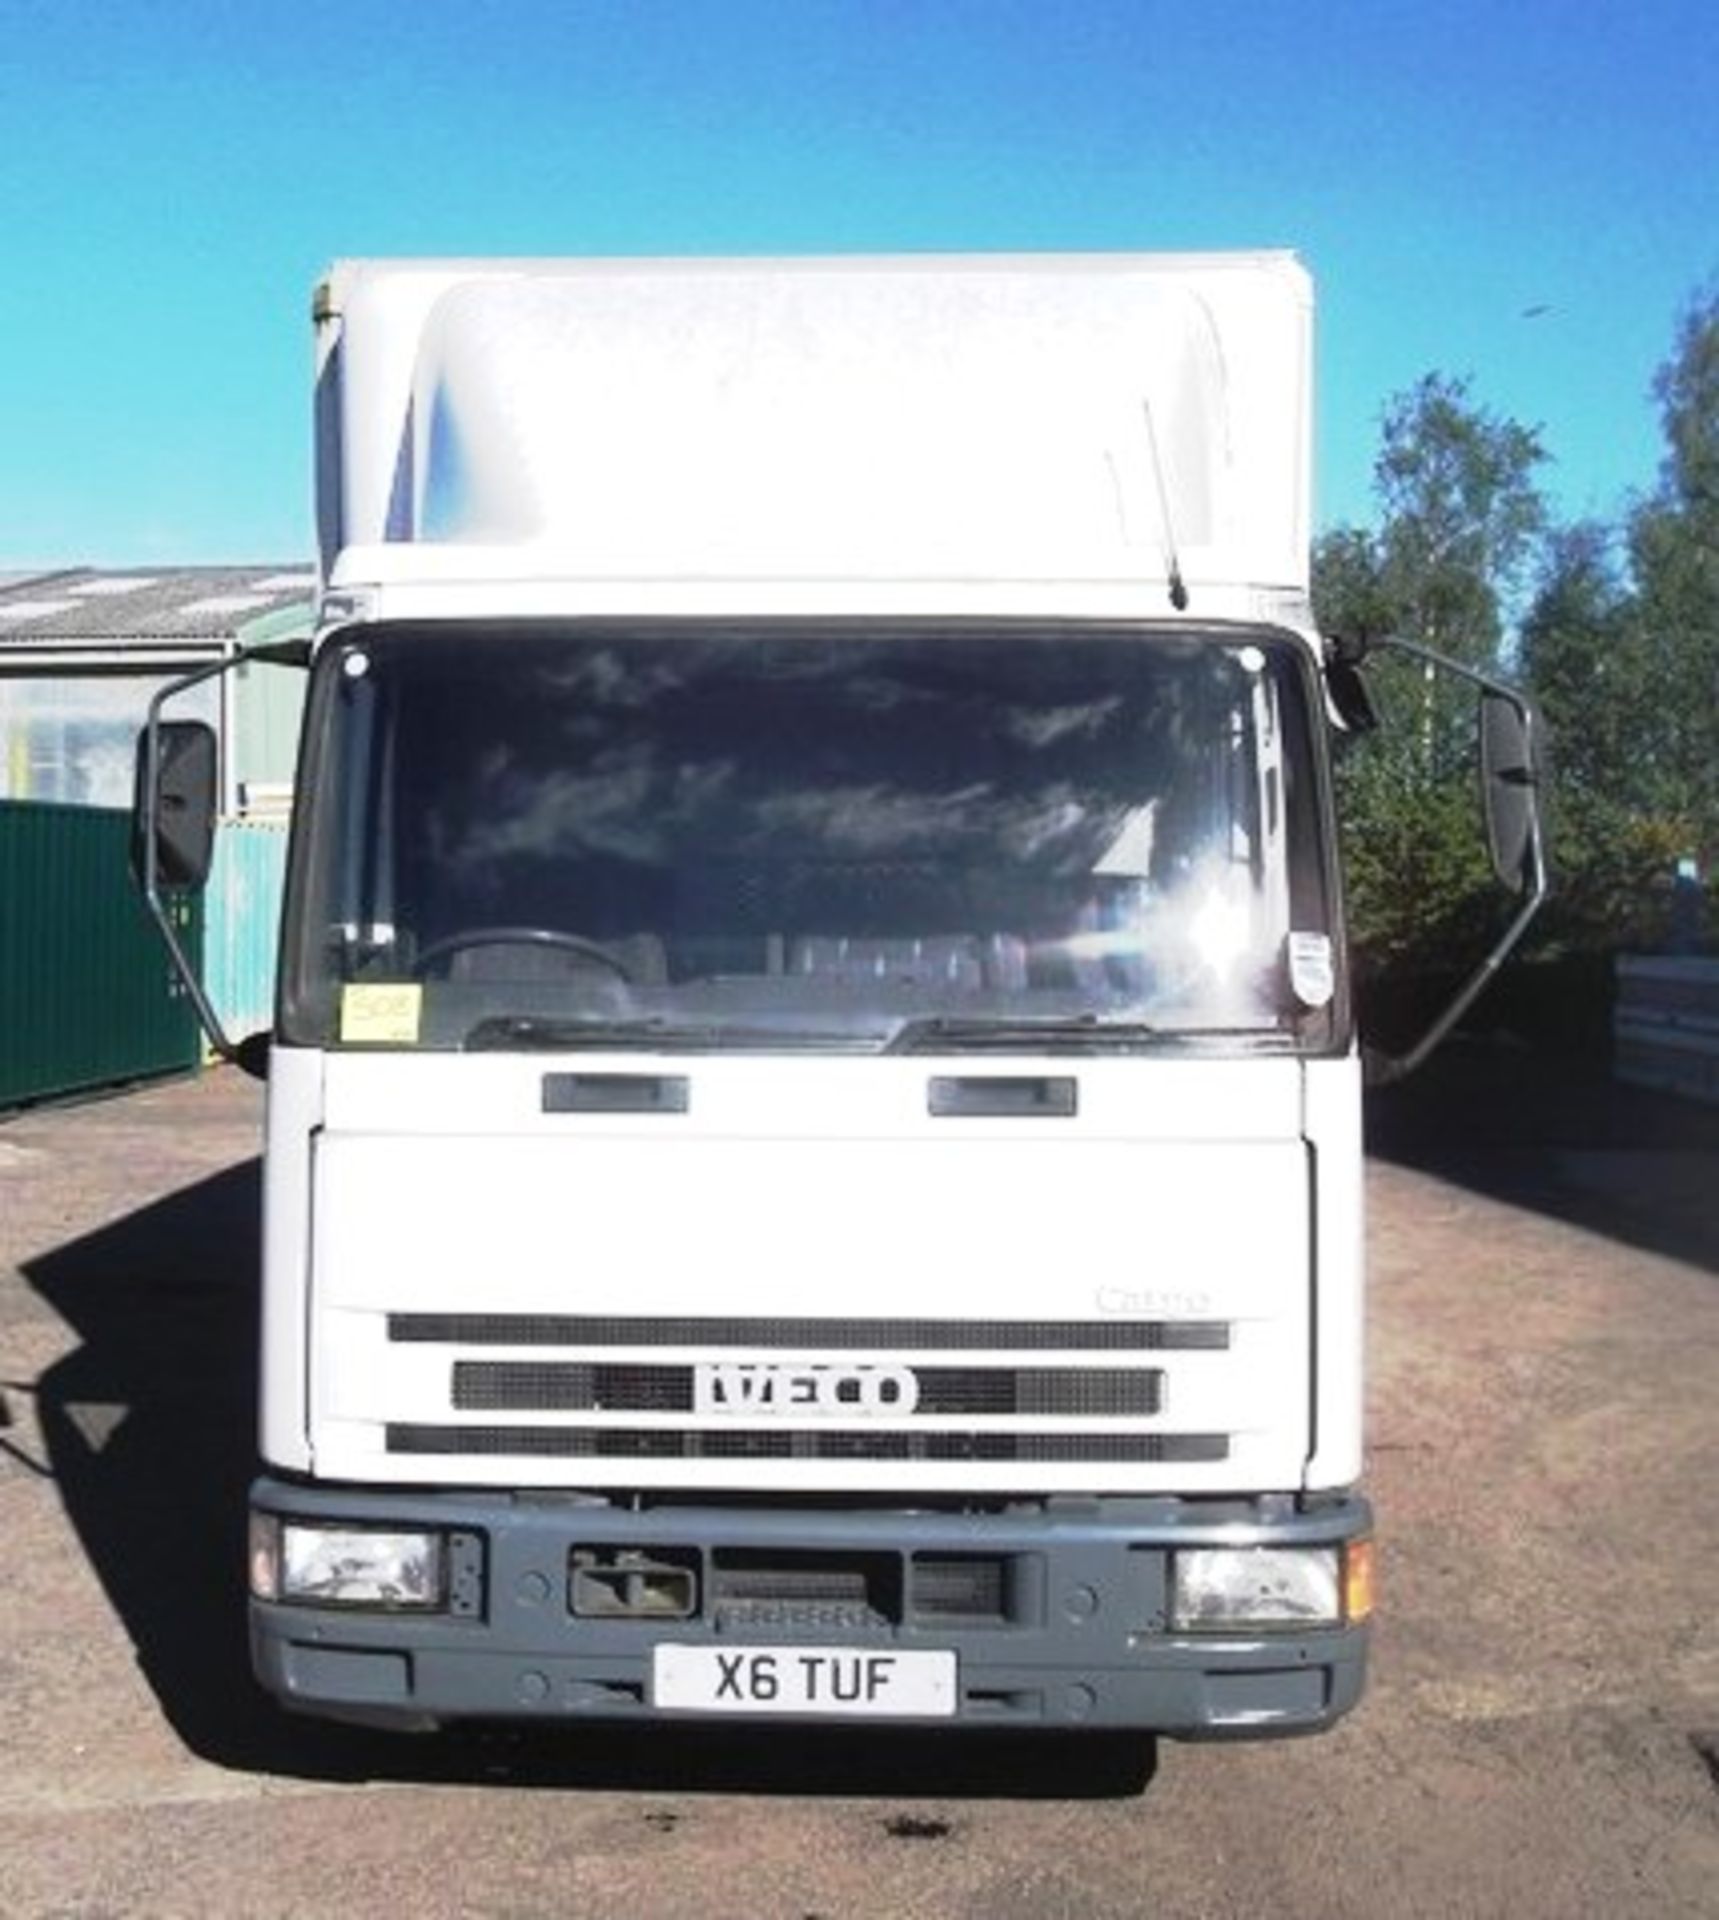 IVECO-FORD CARGO TECTOR - 3920cc
Body: 2 Dr Van
Color: White
First Reg: 05/03/2004
Doors: 2
MOT: - Image 5 of 20